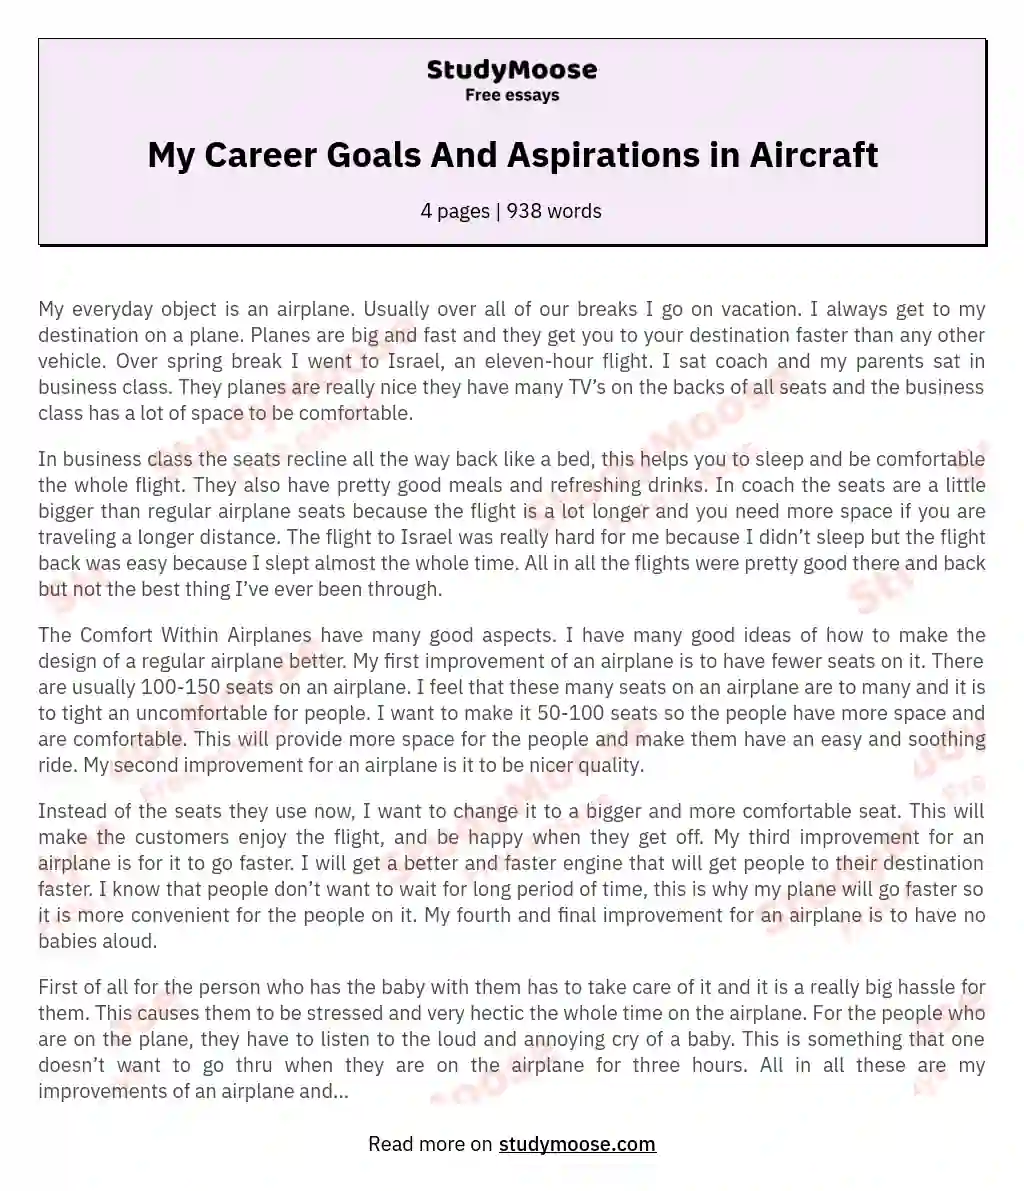 My Career Goals And Aspirations in Aircraft essay